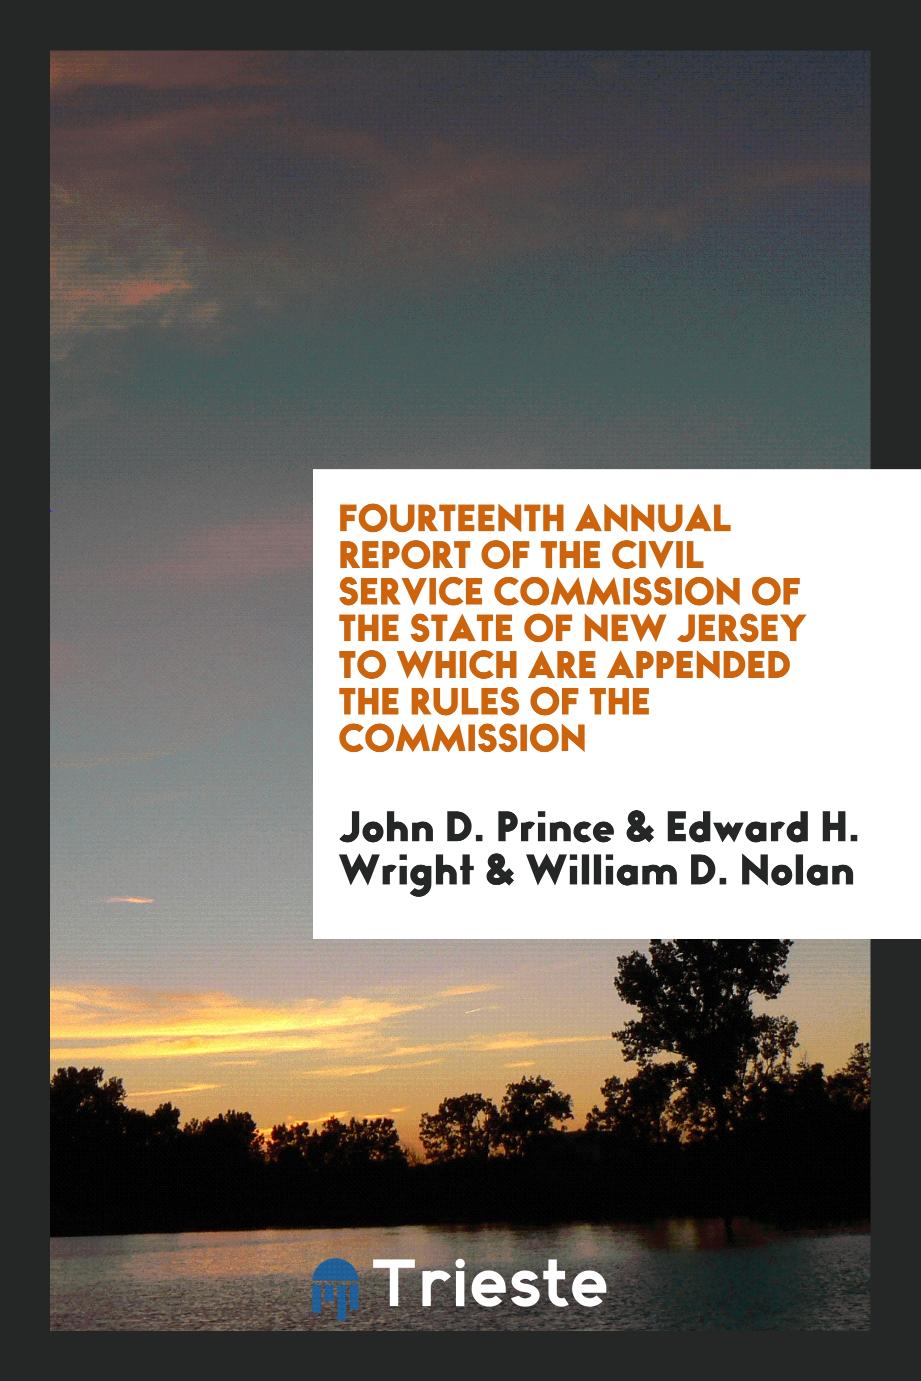 Fourteenth Annual Report of the Civil Service Commission of the State of New Jersey to Which Are Appended the Rules of the Commission